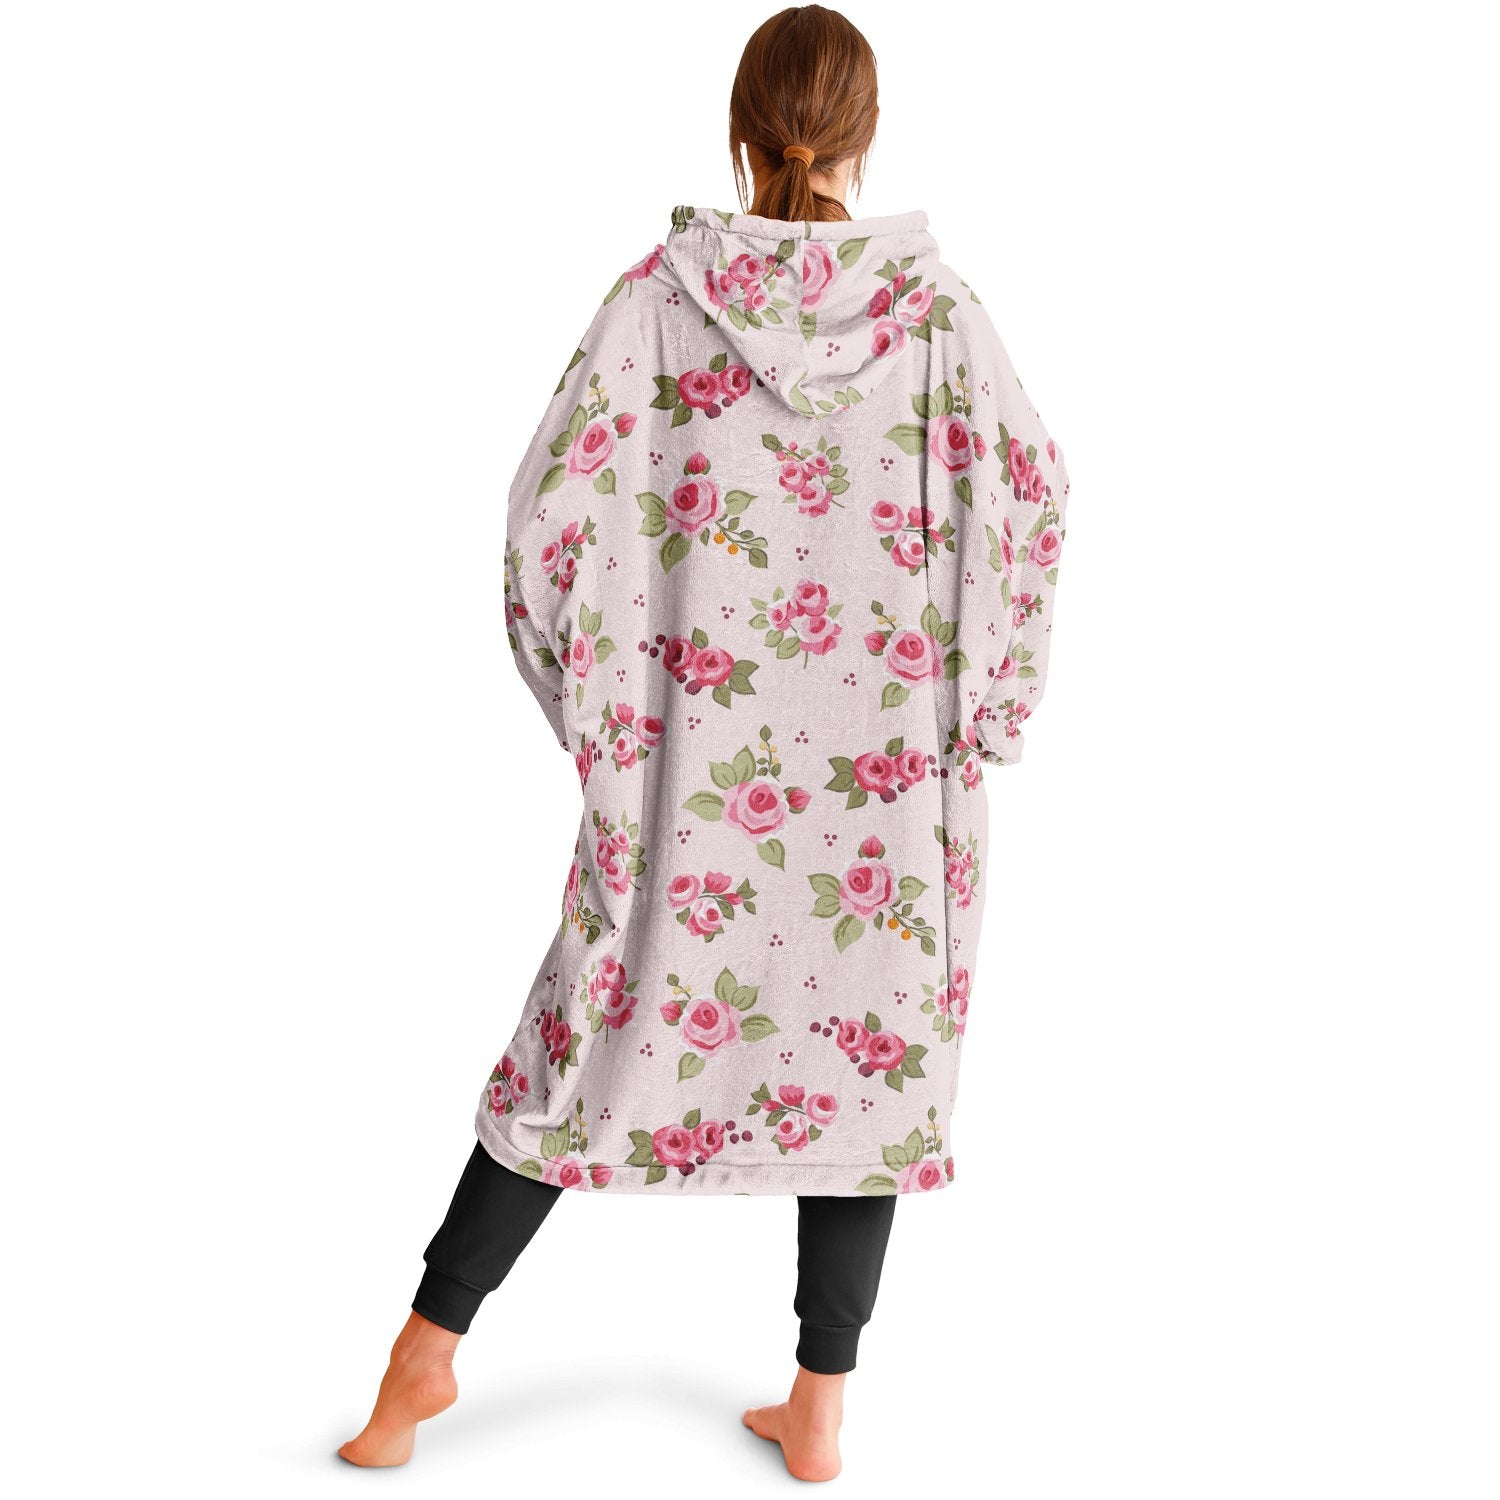 Coquette Hooded Blanket Perfect for Valentine's Day, Galentine's Day, Birthdays or Anniversaries - chaosandthunder